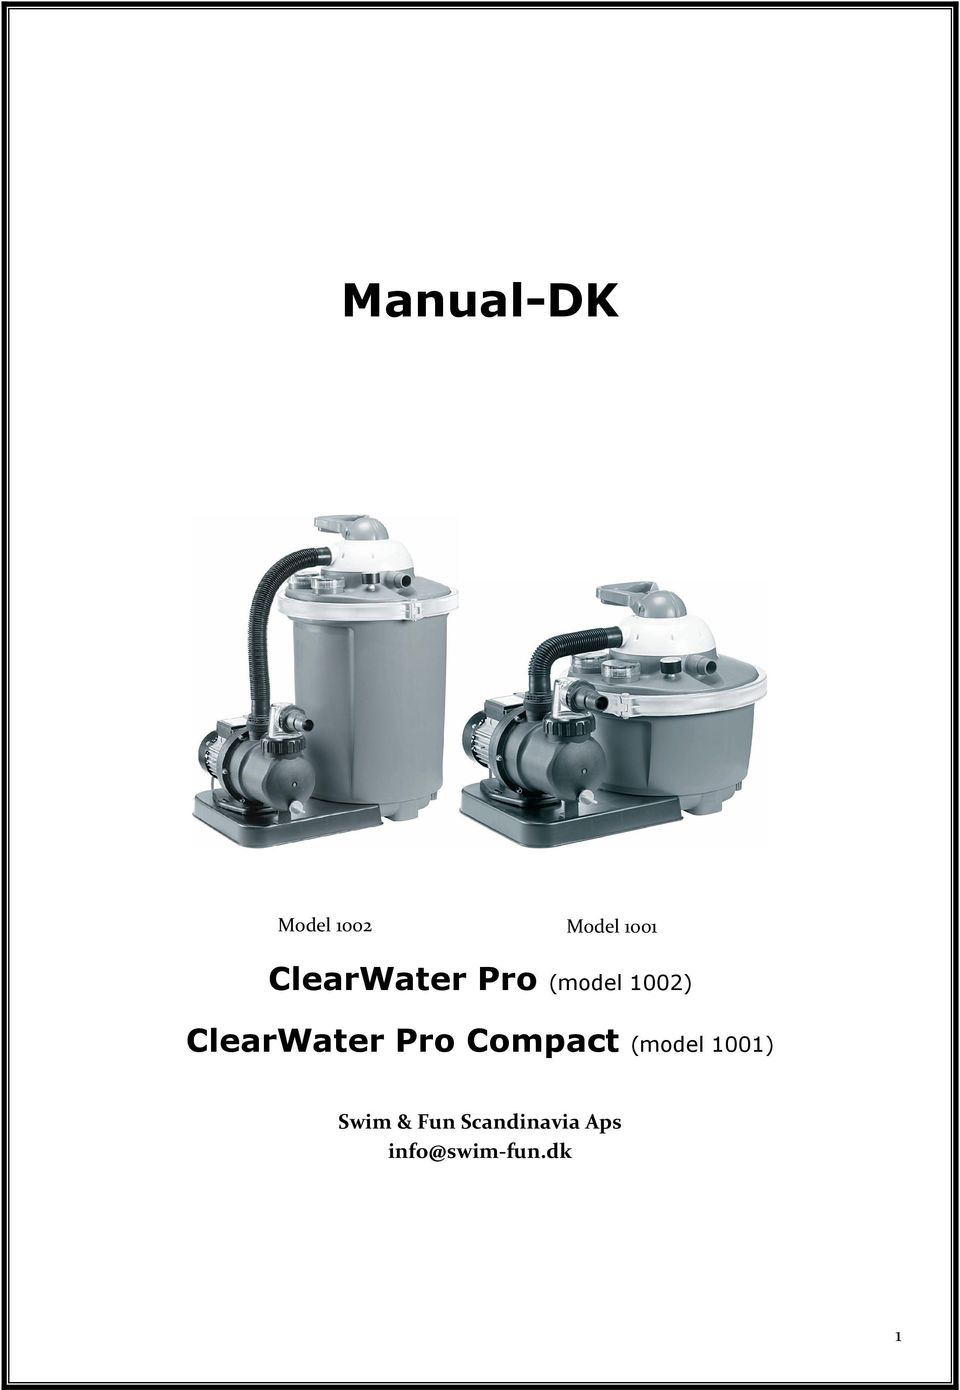 ClearWater Pro Compact (model 1001)